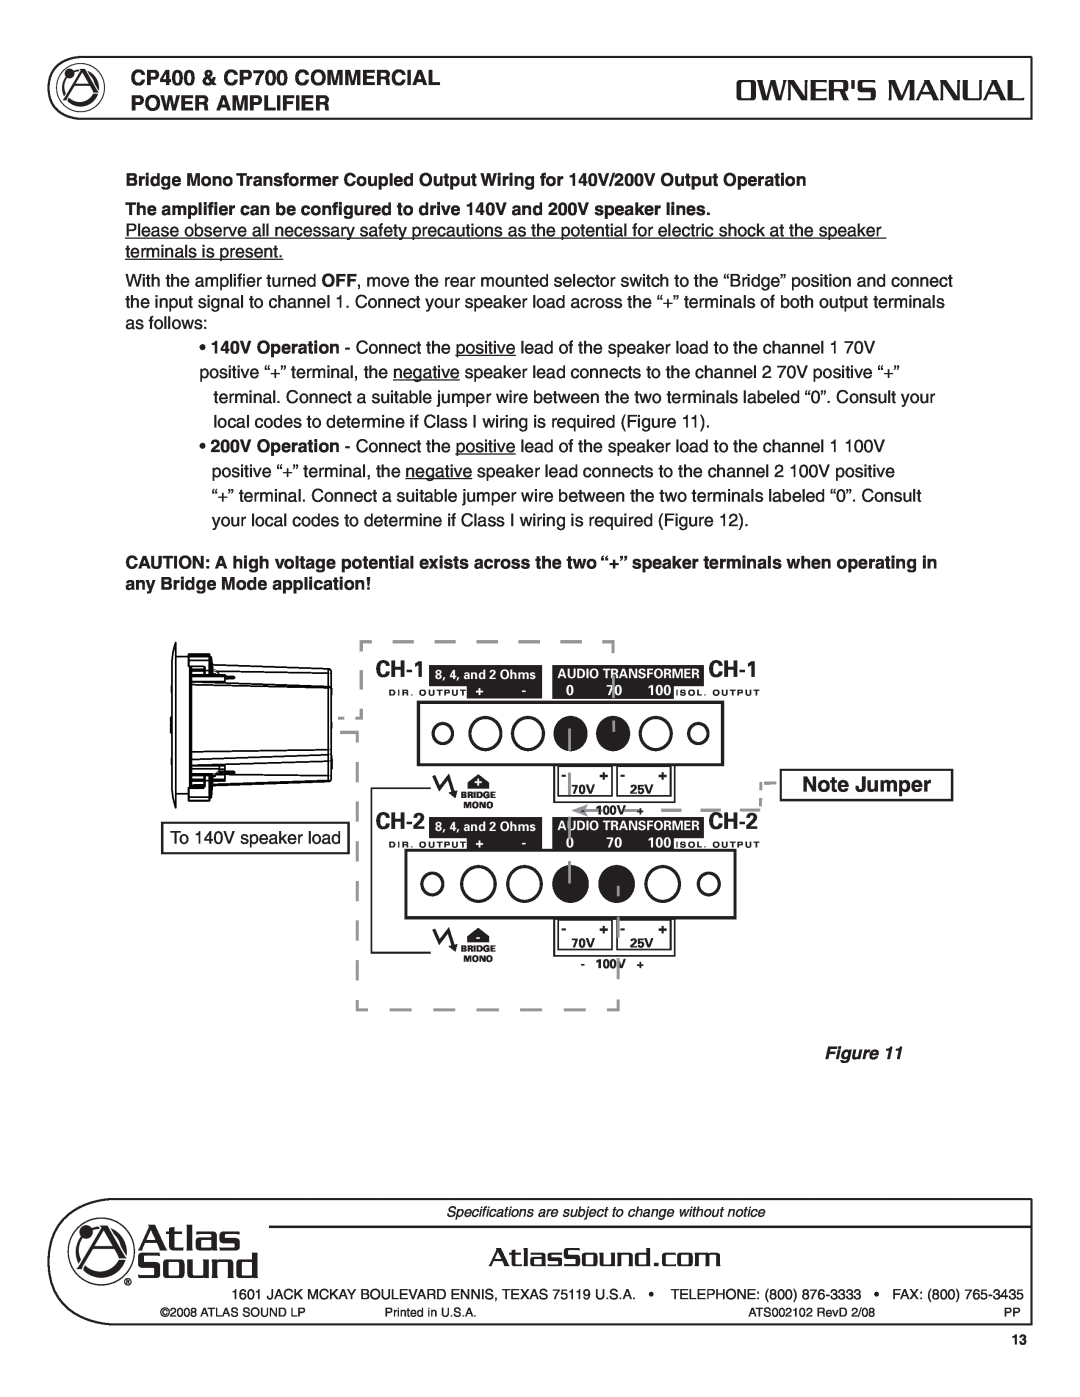 Atlas Sound user service Note Jumper, CP400 & CP700 COMMERCIAL POWER AMPLIFIER, CH-2 